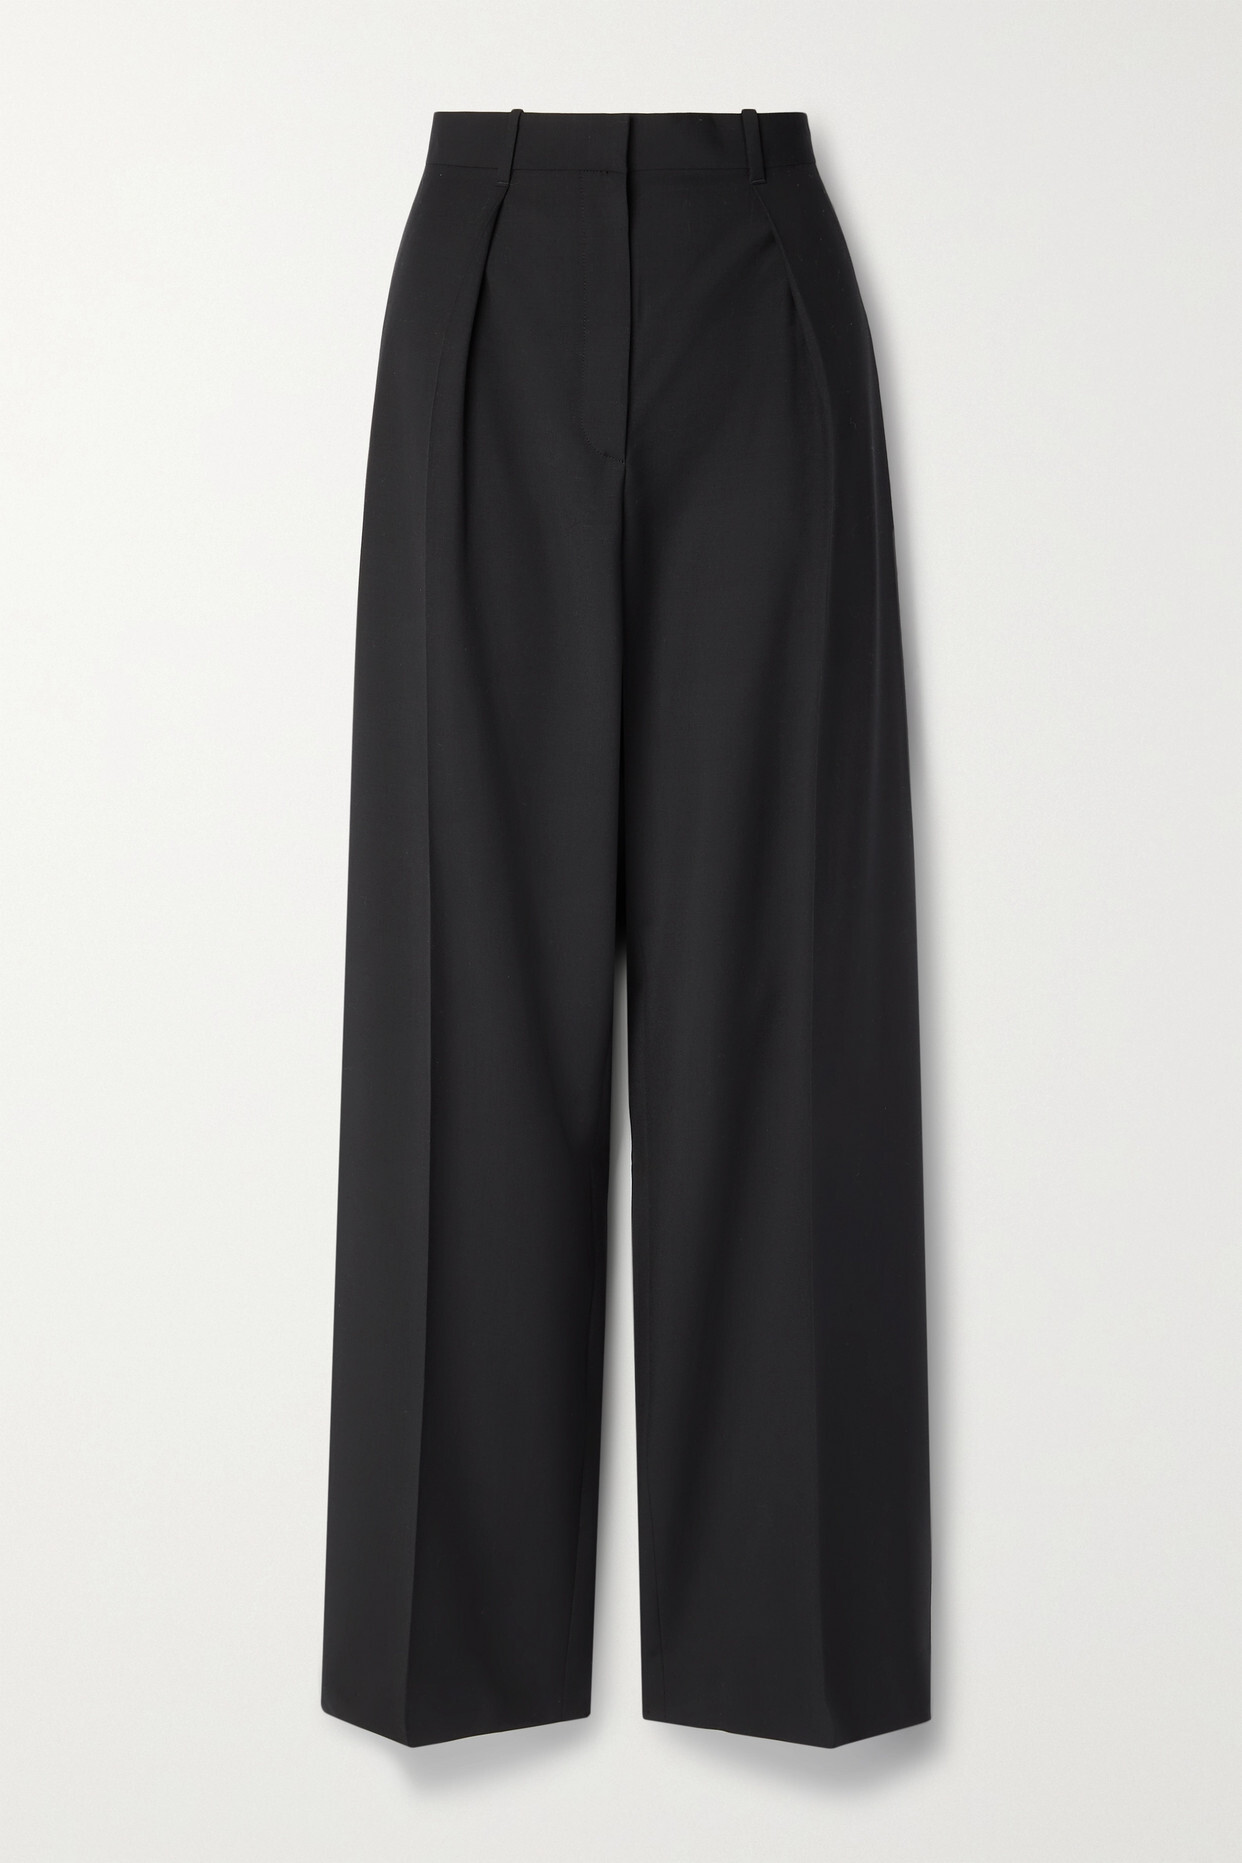 The Row - Marce Wool And Mohair-blend Straight-leg Pants - Black